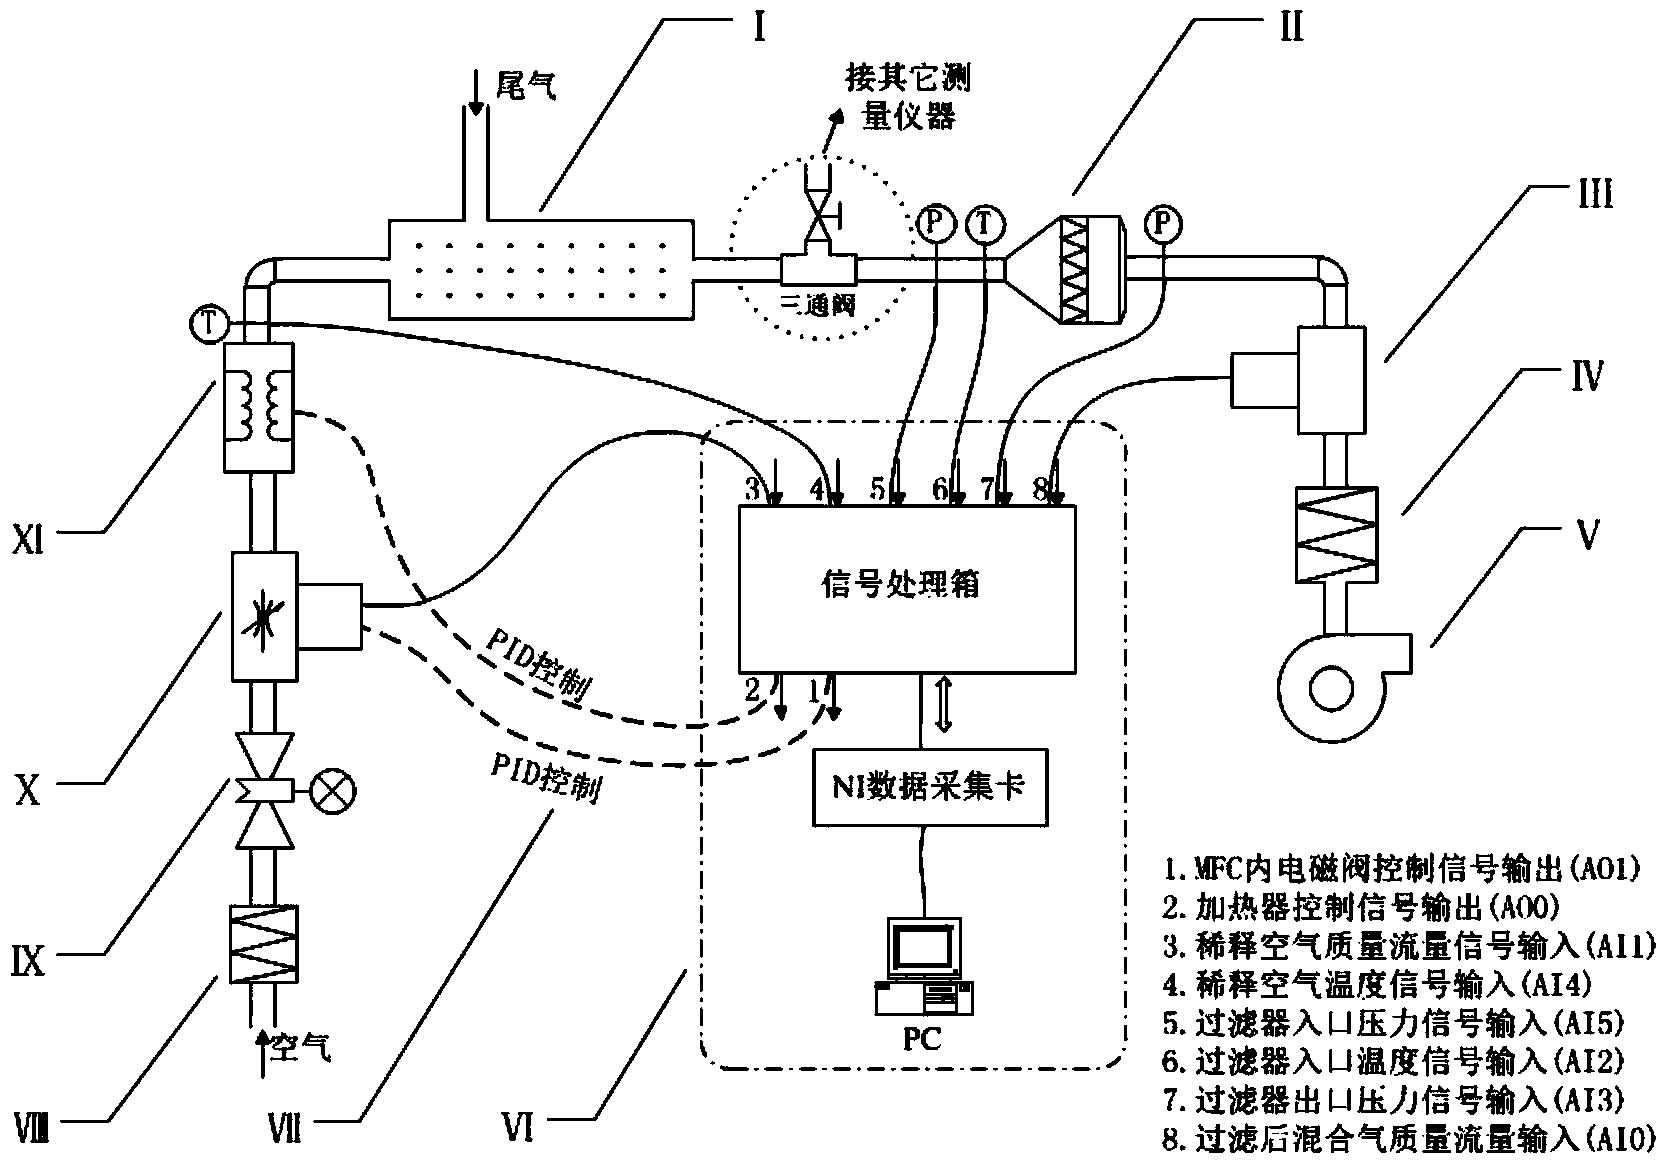 Automatic-regulating discharged particulate matter dilution sampling device